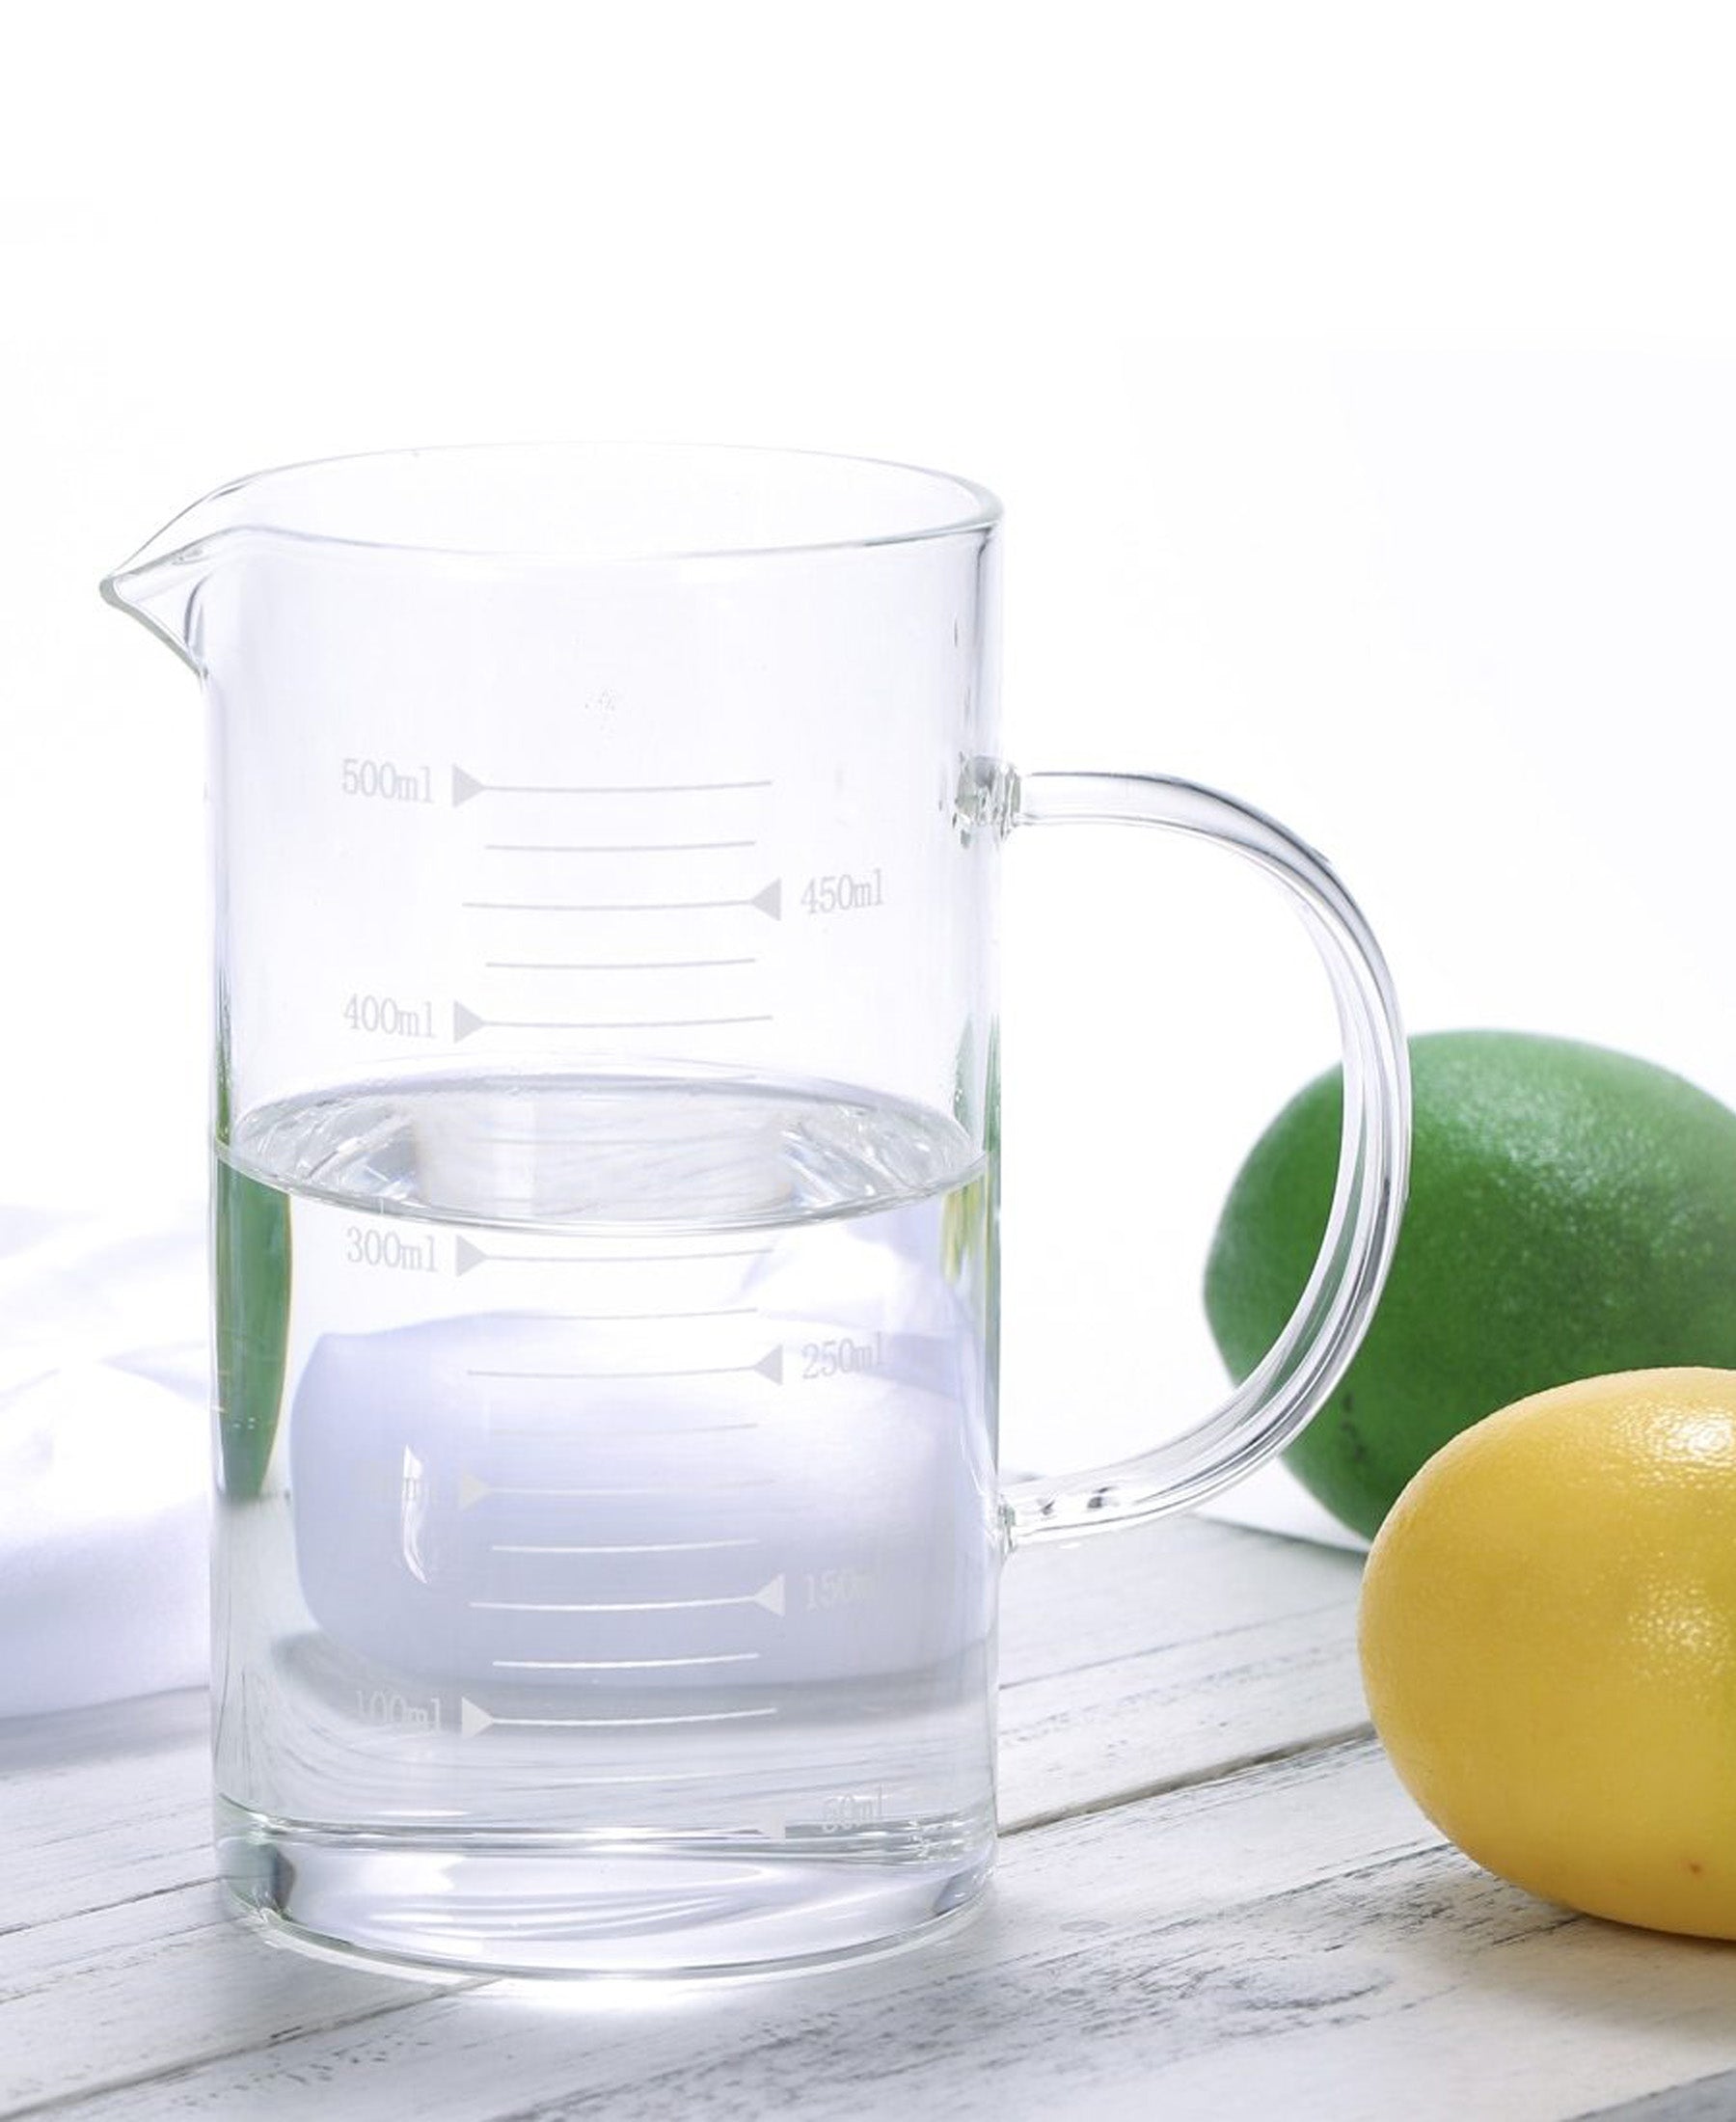 Kitchen Life 500ml Borosilicate Glass Measuring Cup - Clear